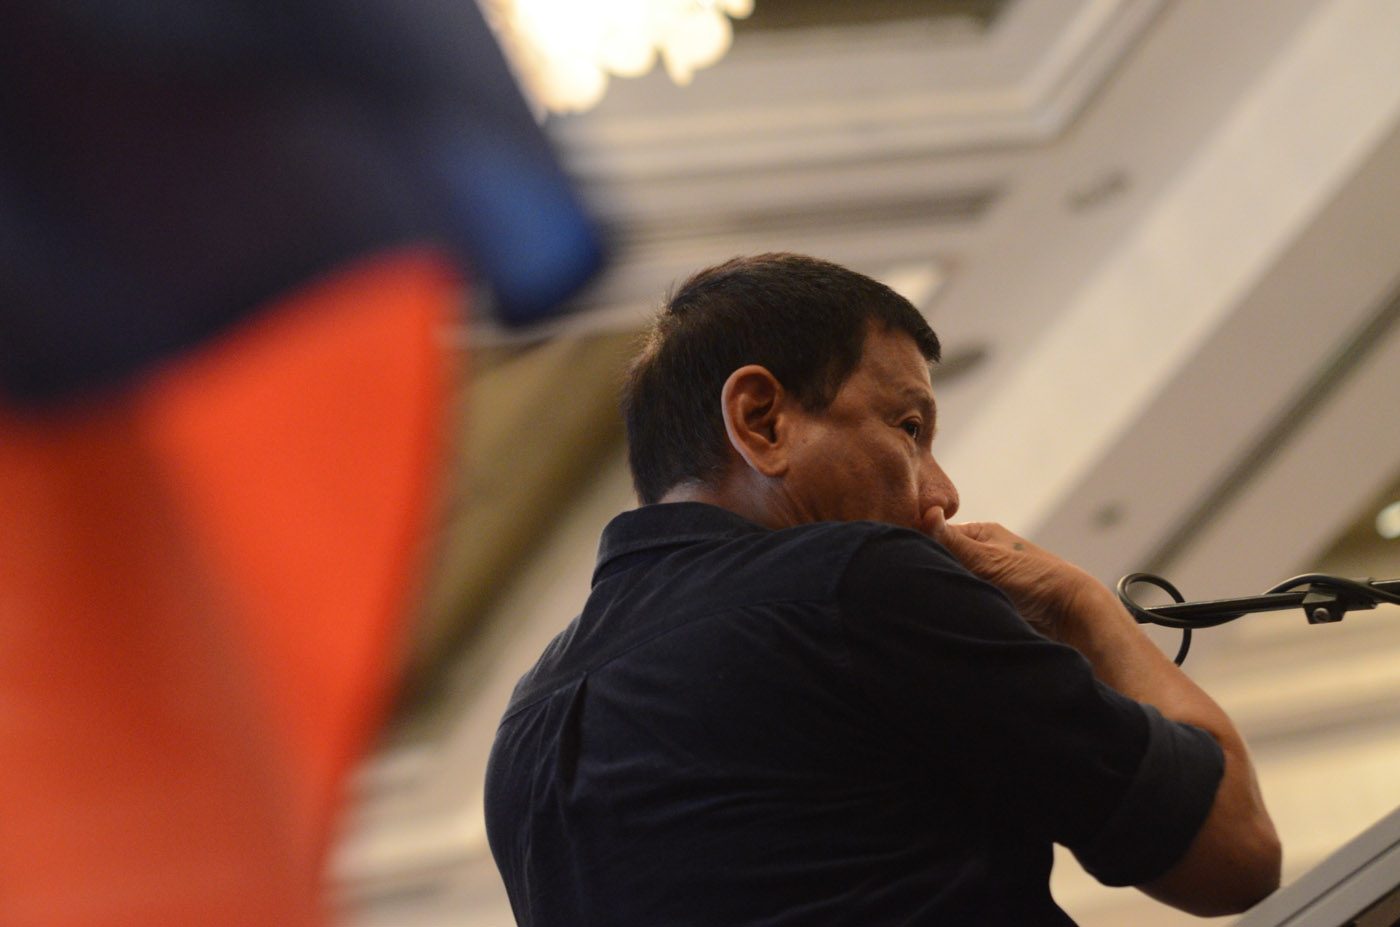 READING DUTERTE'S MIND. Duterte speaks at a business forum at The Manila Peninsula Hotel in April 2016. Photo by Alecs Ongcal/Rappler  